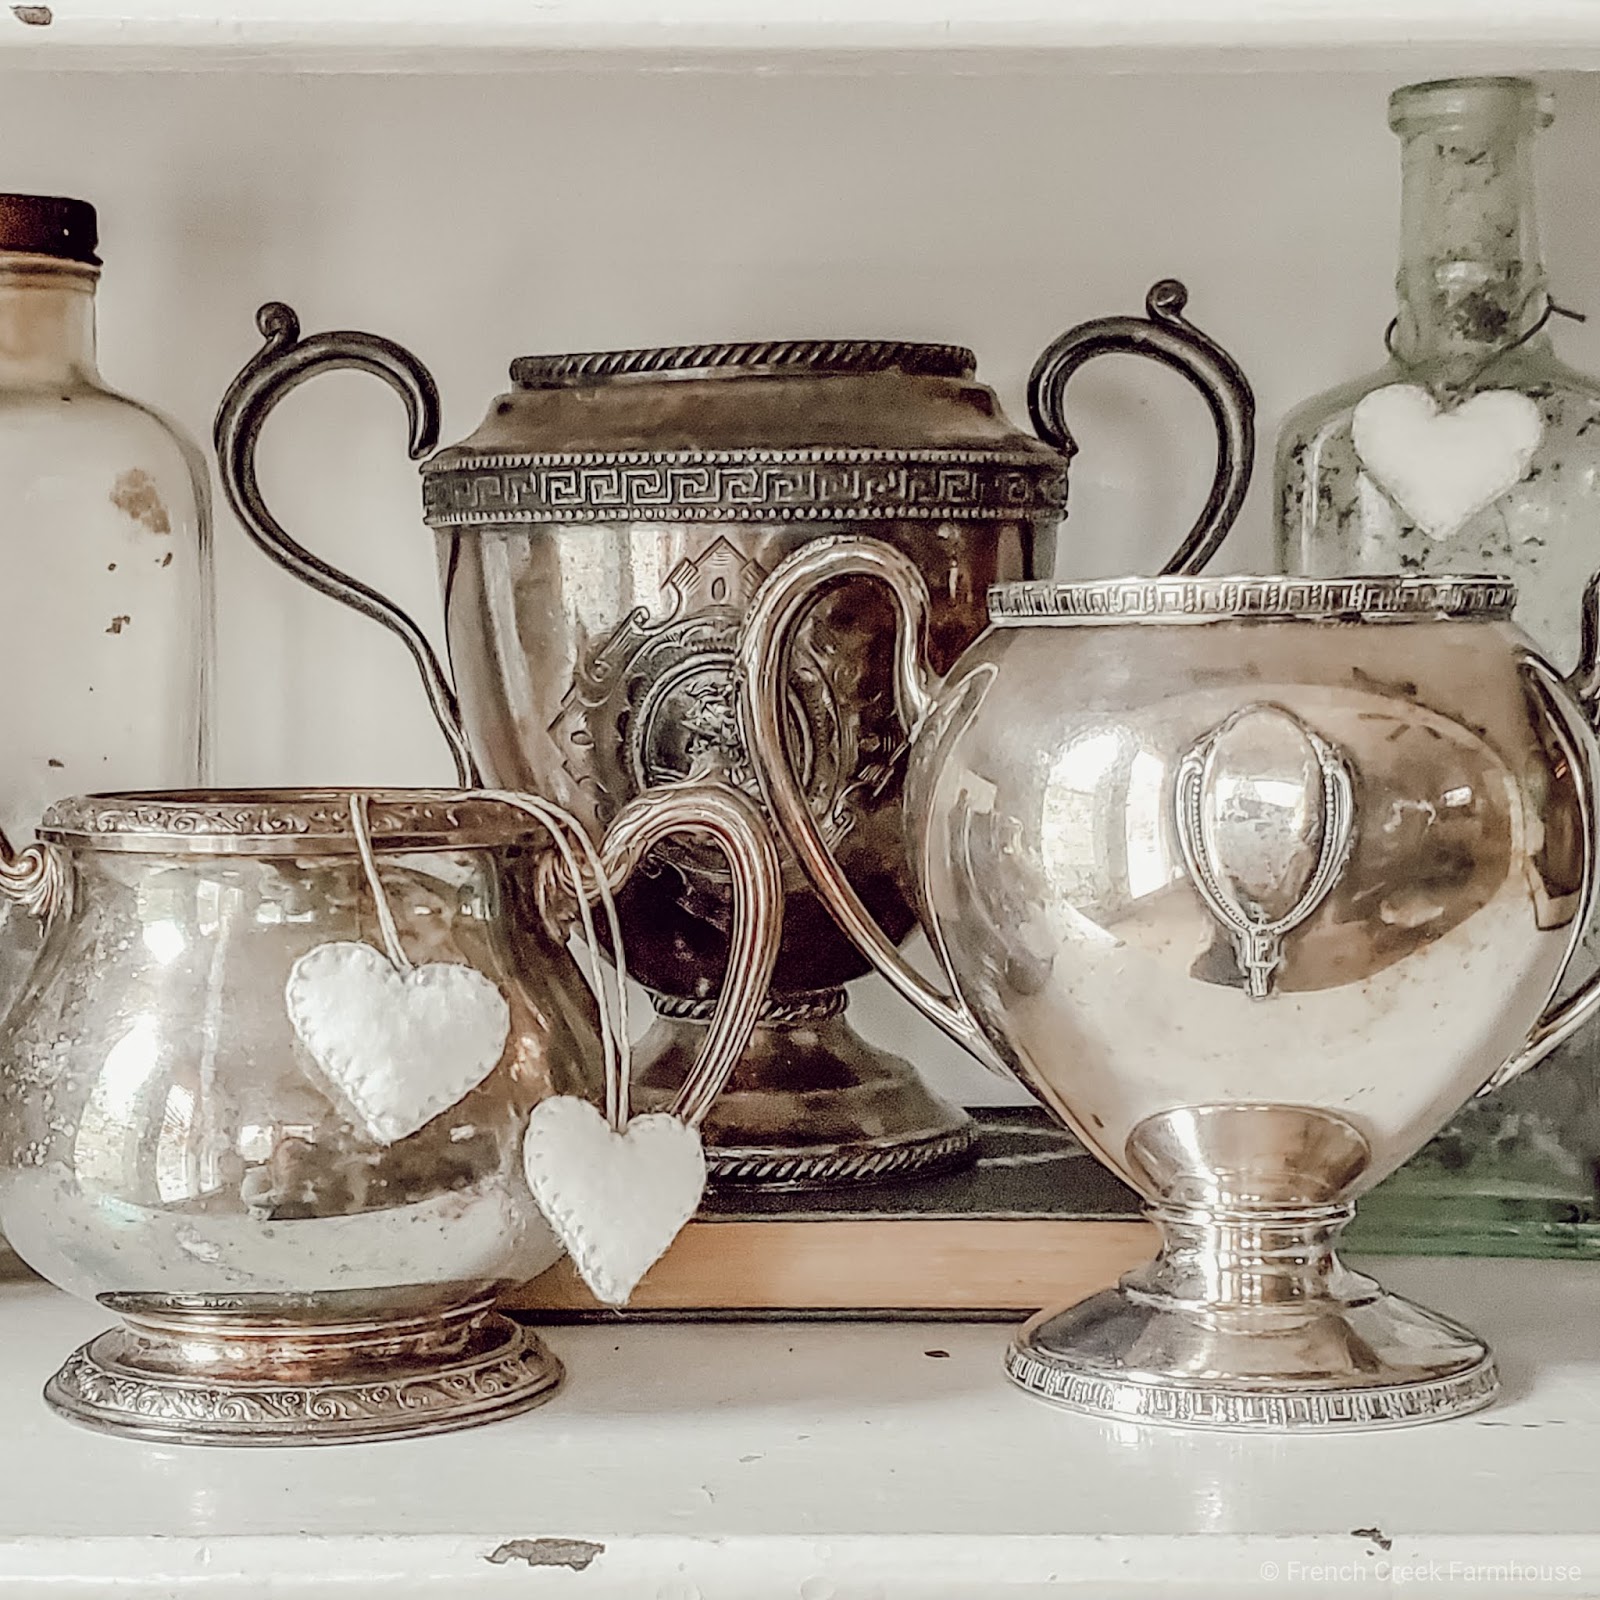 A collection of vintage trophies decorated with hand-sewn hearts for Valentine's Day